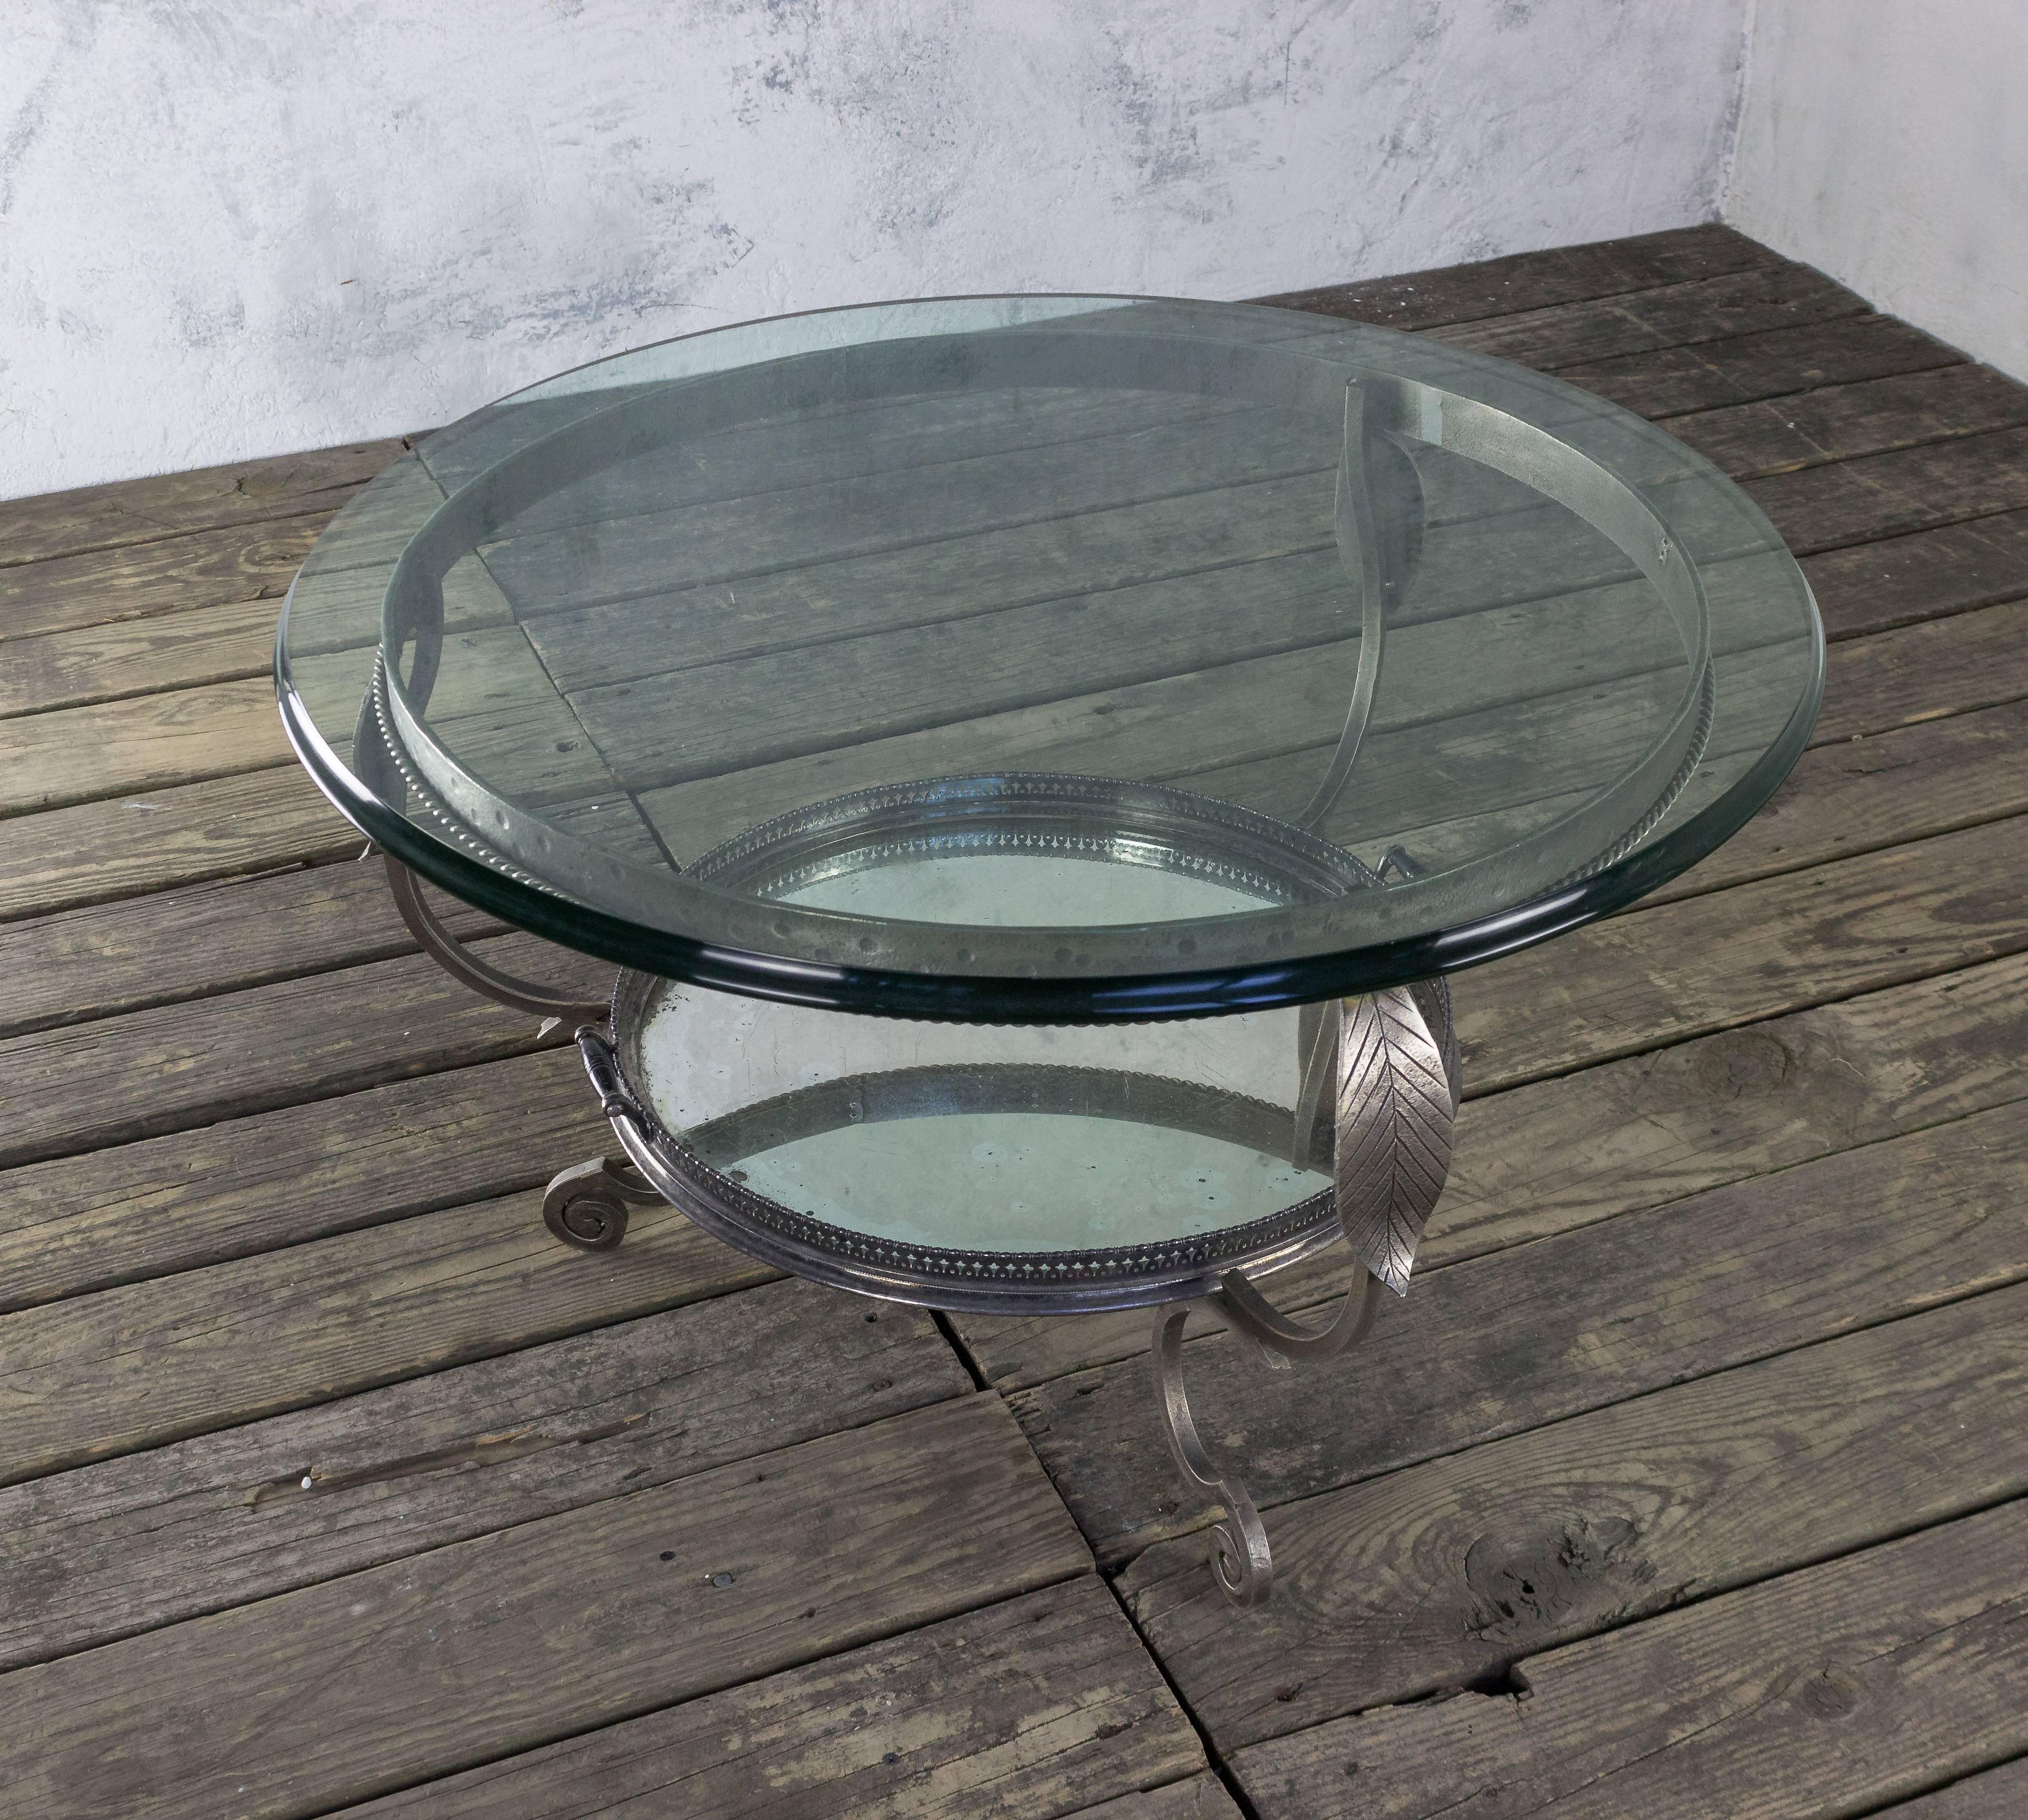 A stunning French coffee table from the 1940s, characterized by its stylish round design and a captivating glass top. This exquisite piece features a silvered metal serving tray elegantly resting on a shelf beneath the glass surface. Recently plated